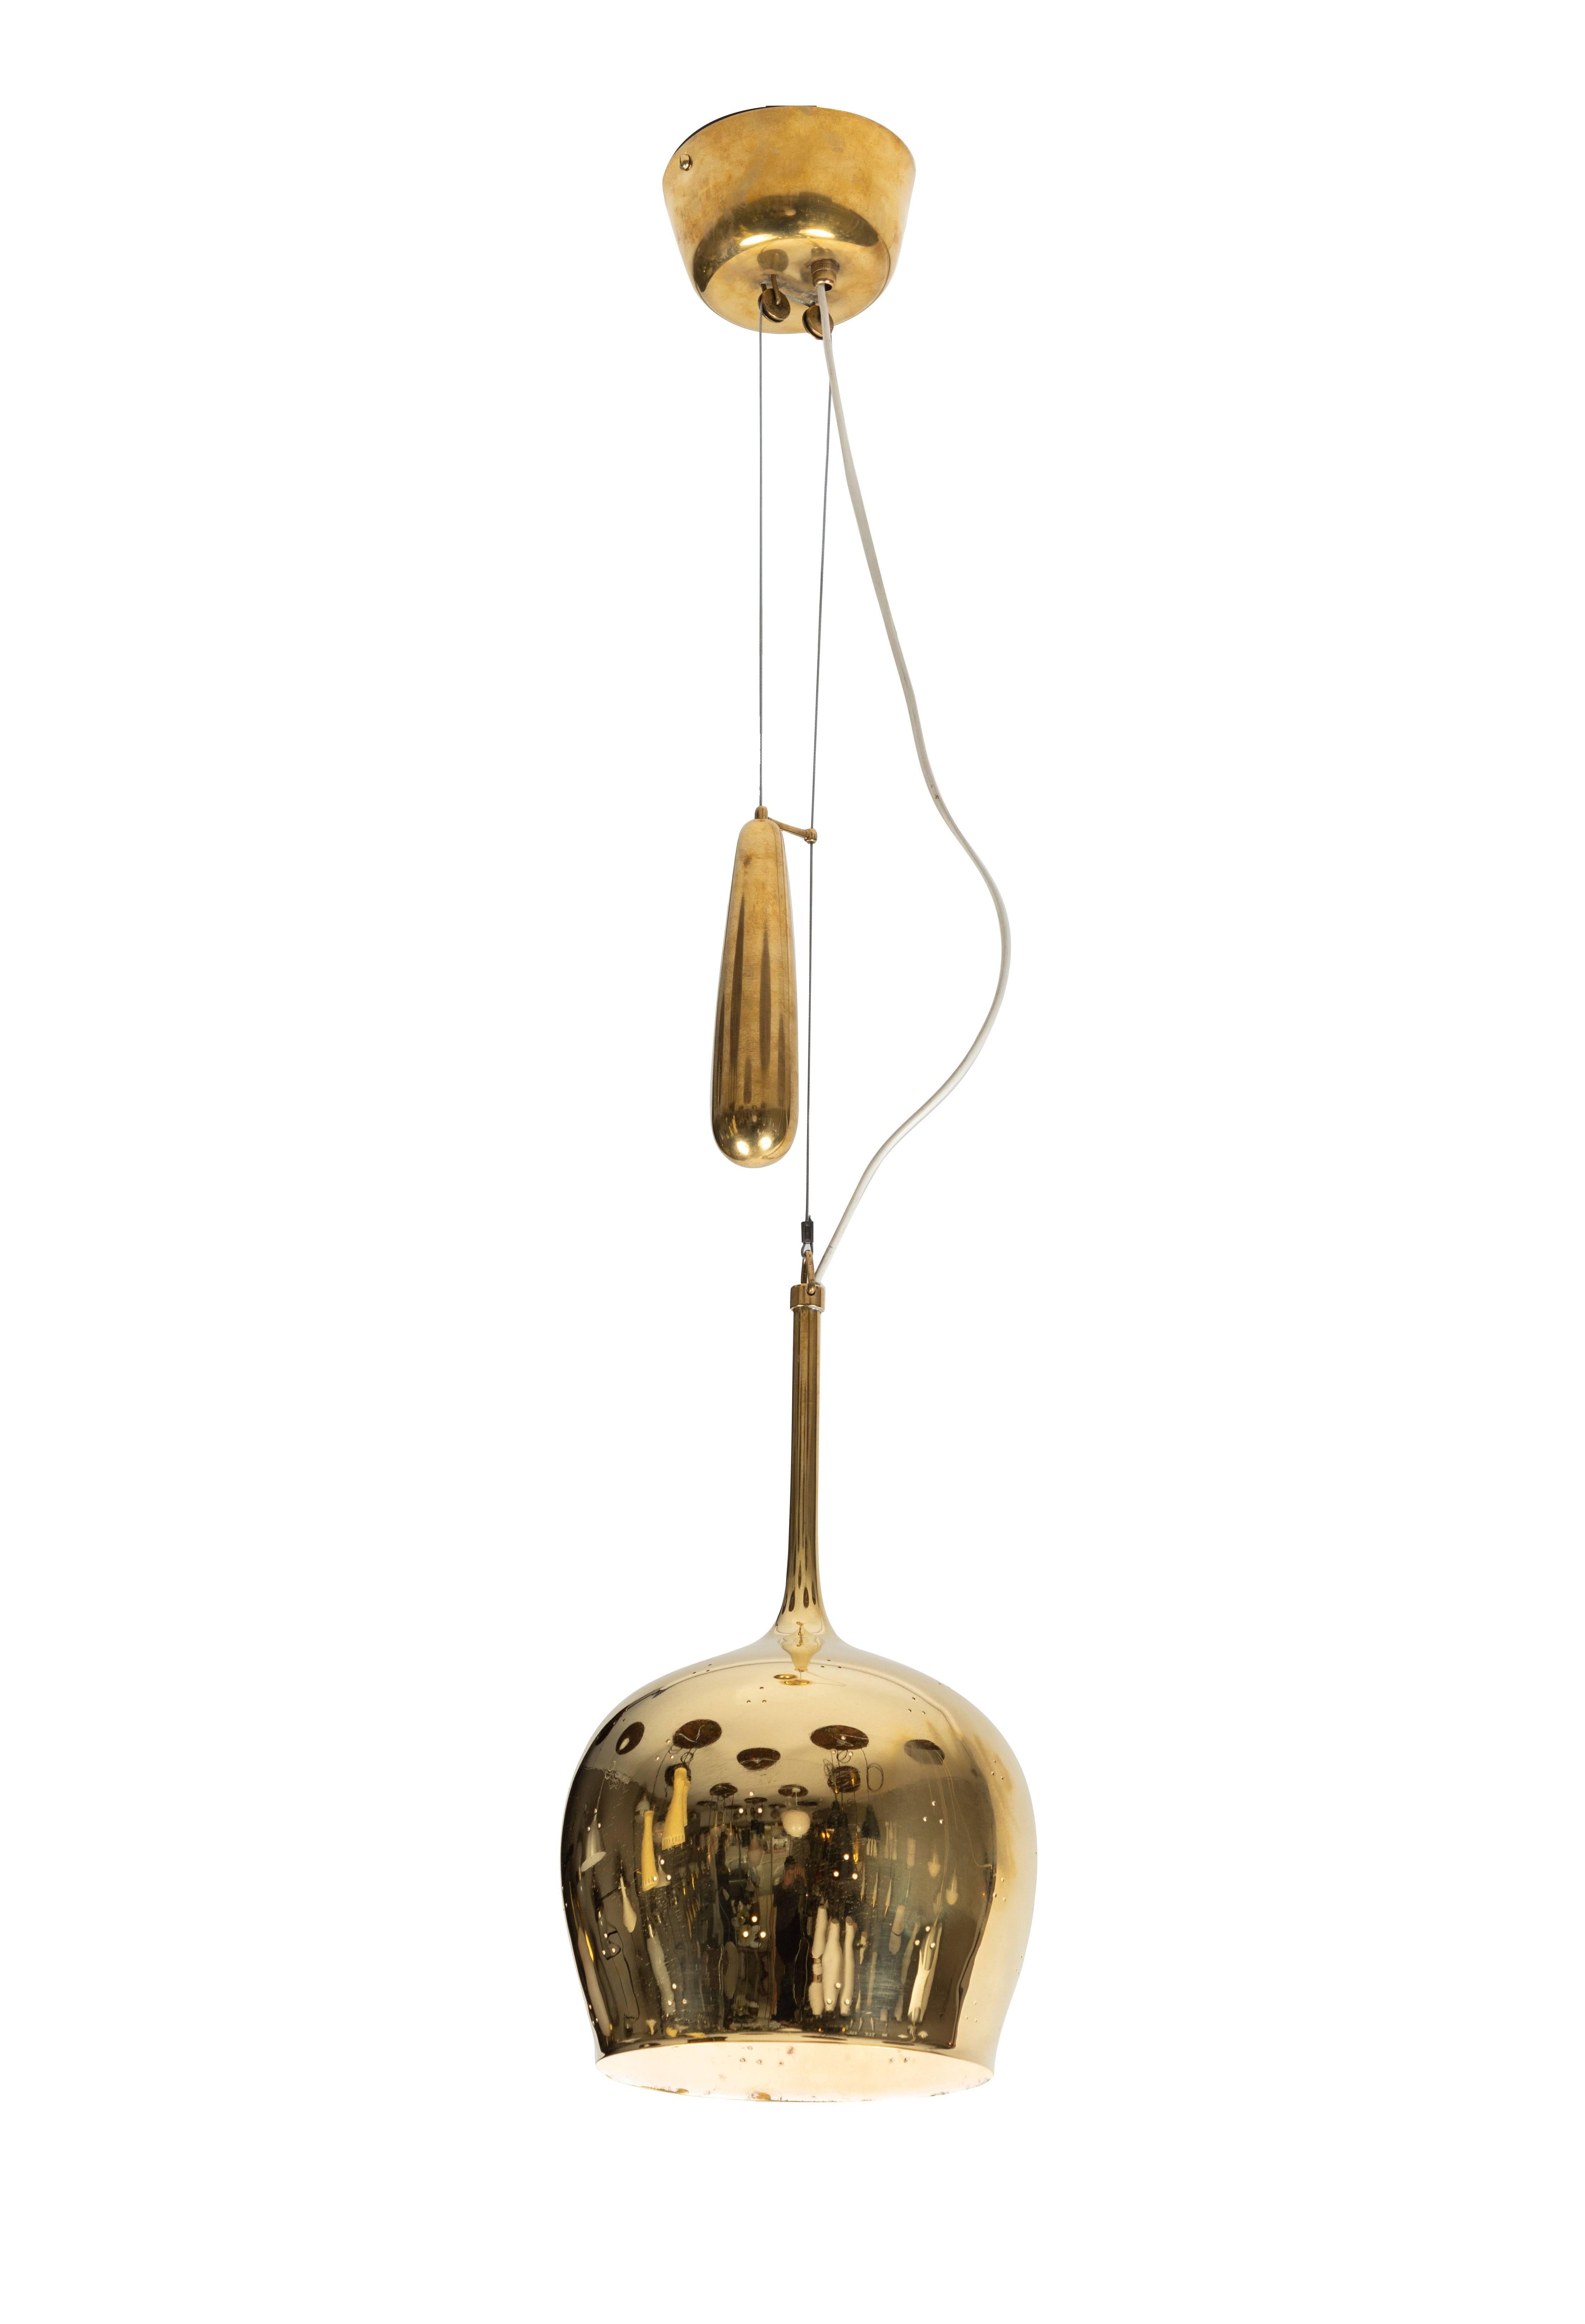 1950s Paavo Tynell A1957 counterweight pendant. This rare and exceptionally refined ceiling light is executed in brass, and can be raised and lowered using its ingenious counterweight and pulley system. Manufactured by Taito Oy in the early 1950s,